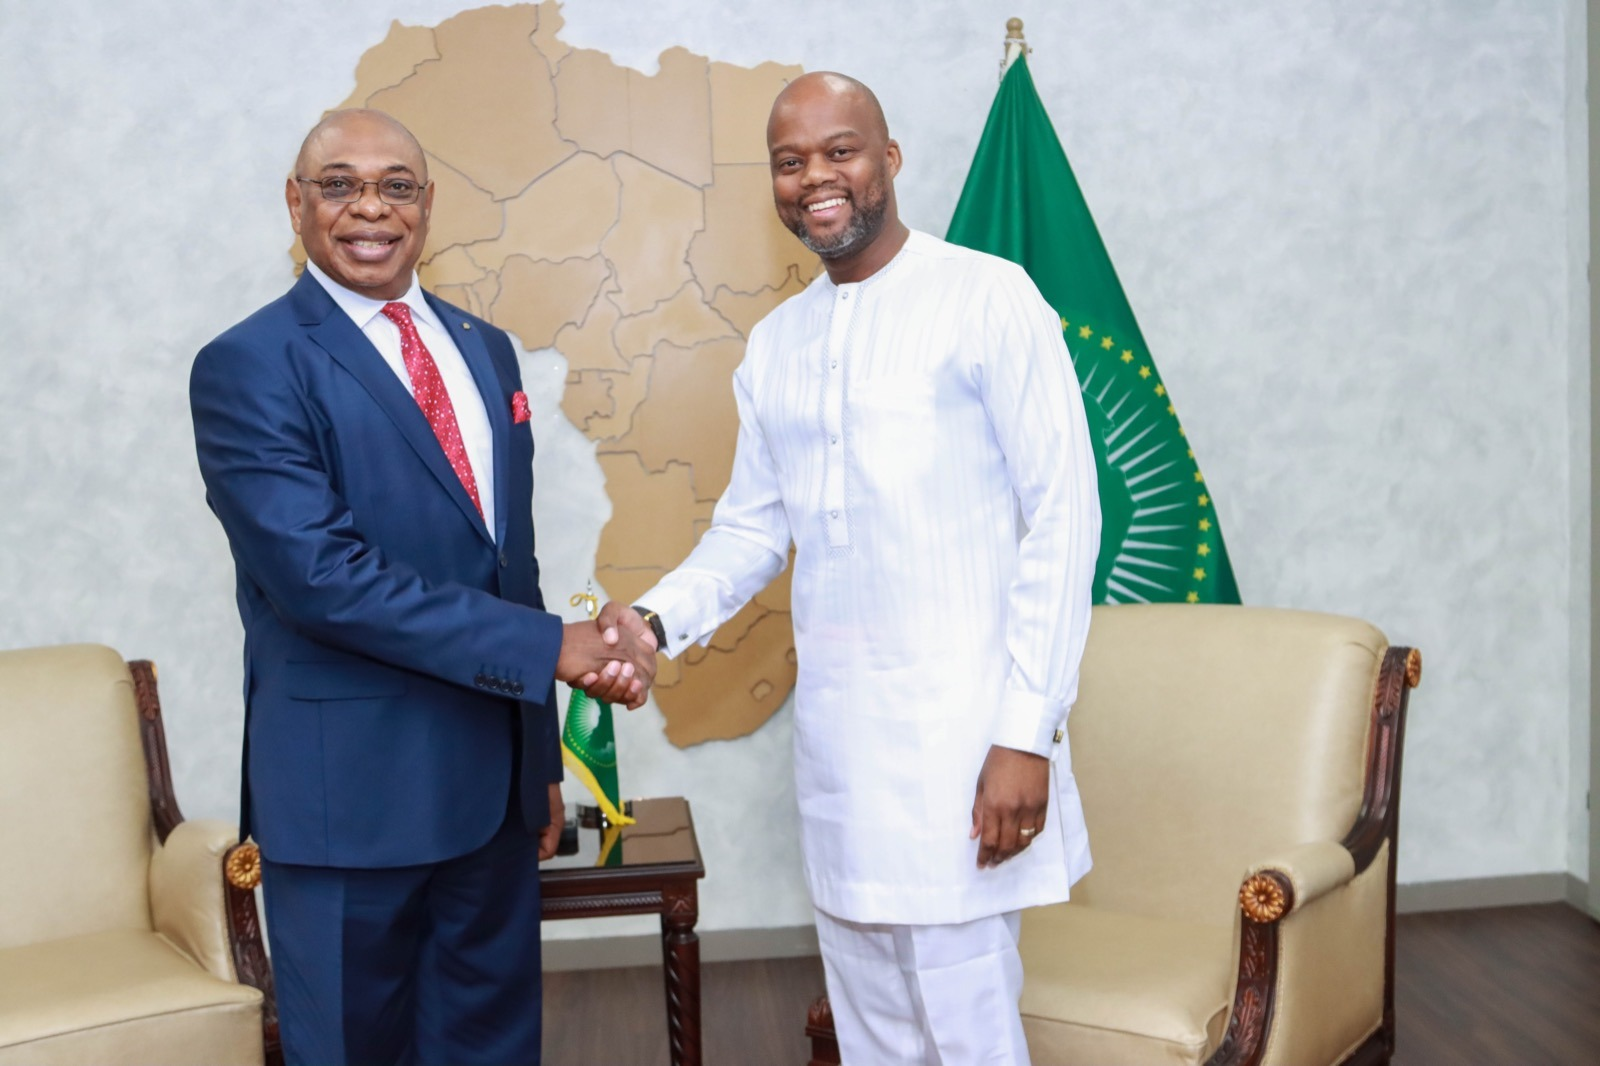 MOWCA, AfCFTA form alliance to promote intra-African trade